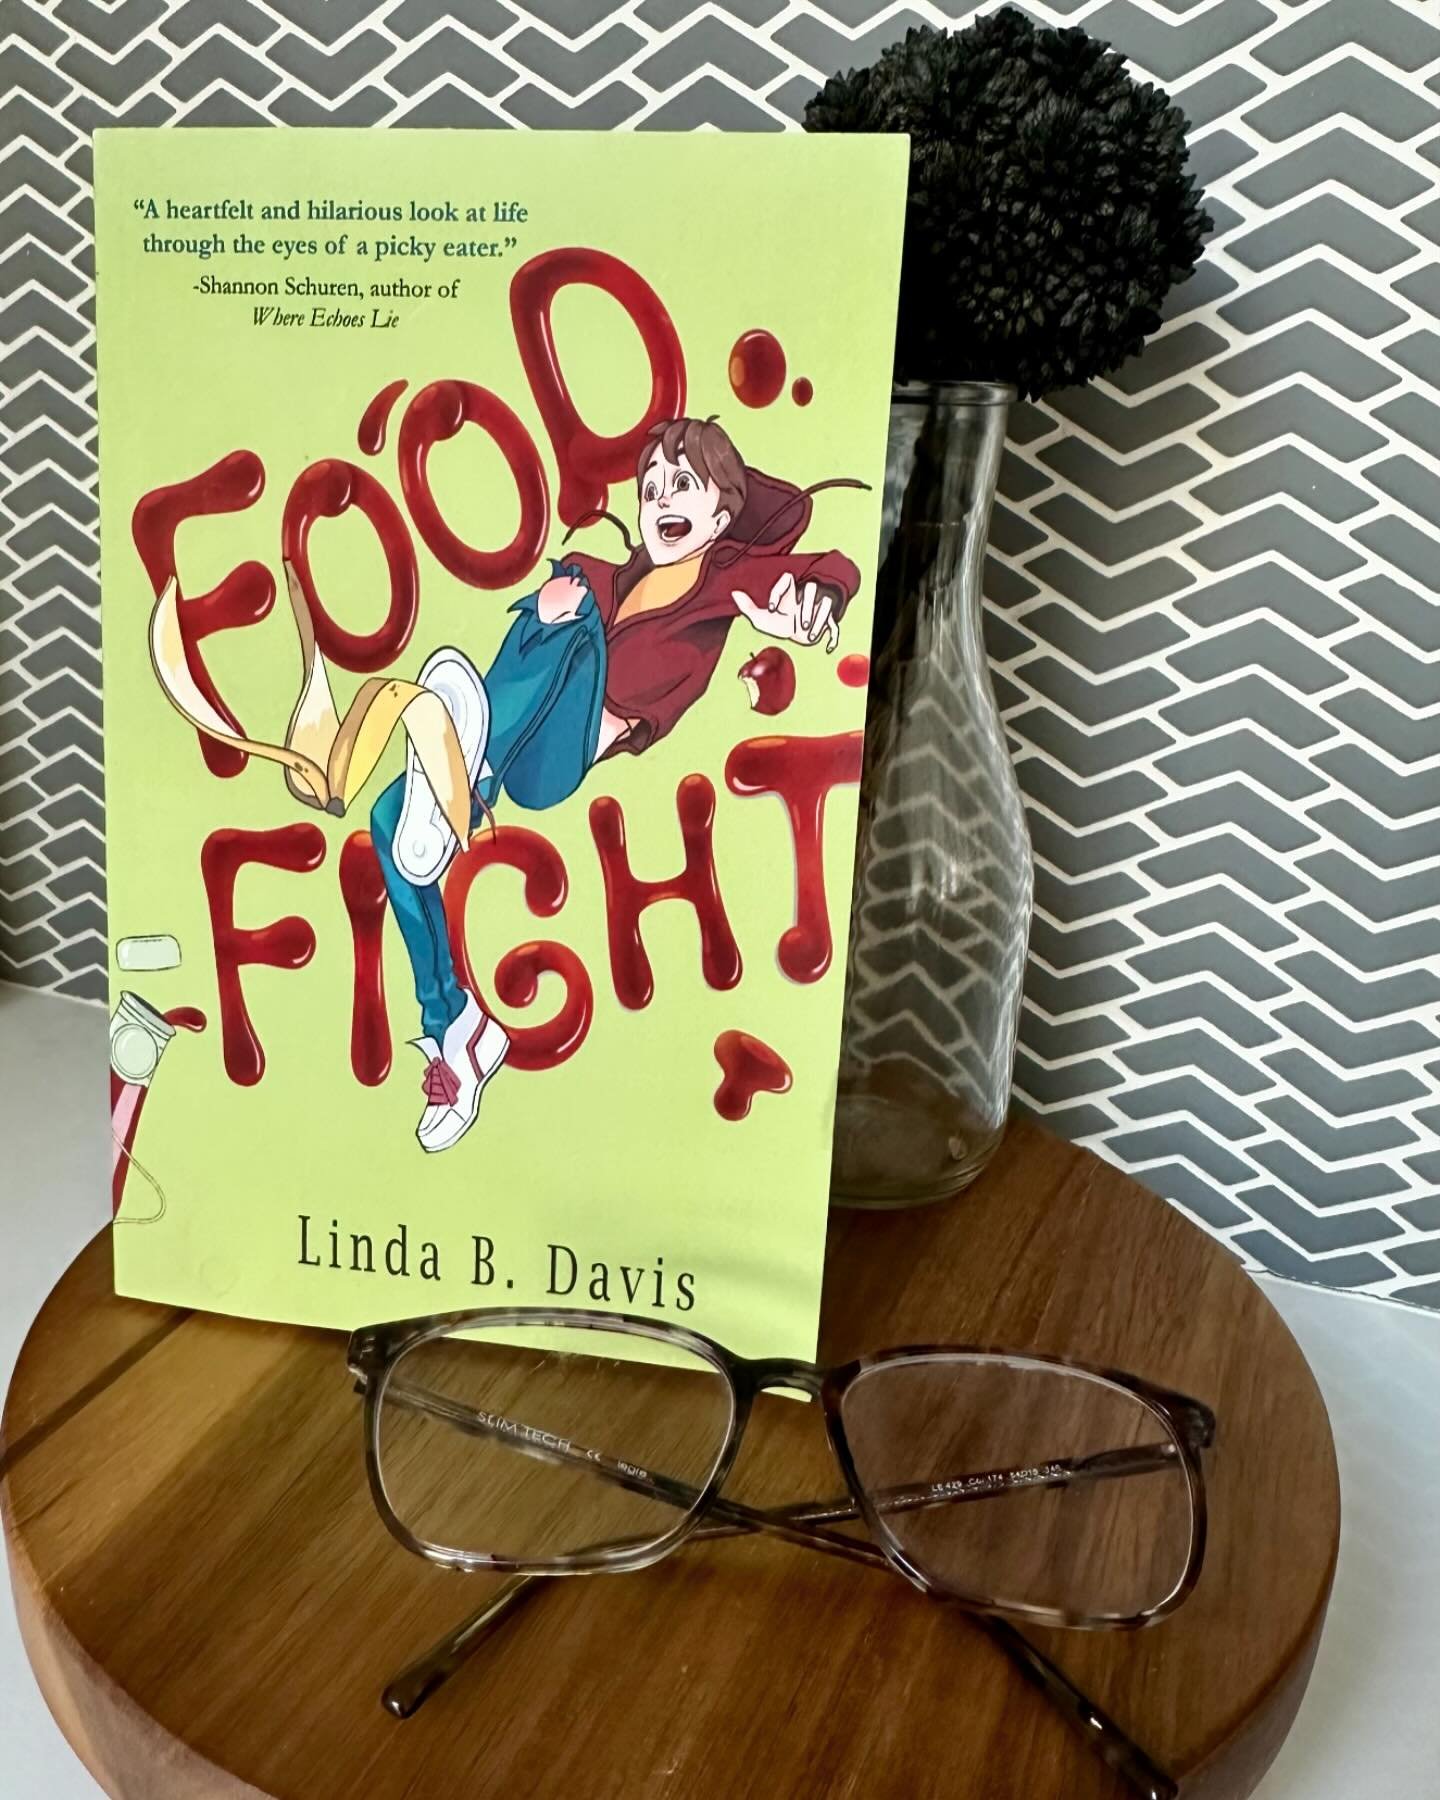 ✅ Novel
✅ Middle School characters
✅ Funny/heartfelt
✅ ARFID Character

With my ARFID twins in Middle school I knew this was a must read for me. Linda Davis created this wonderful novel with main character Ben who has ARFID. The book shares his journ